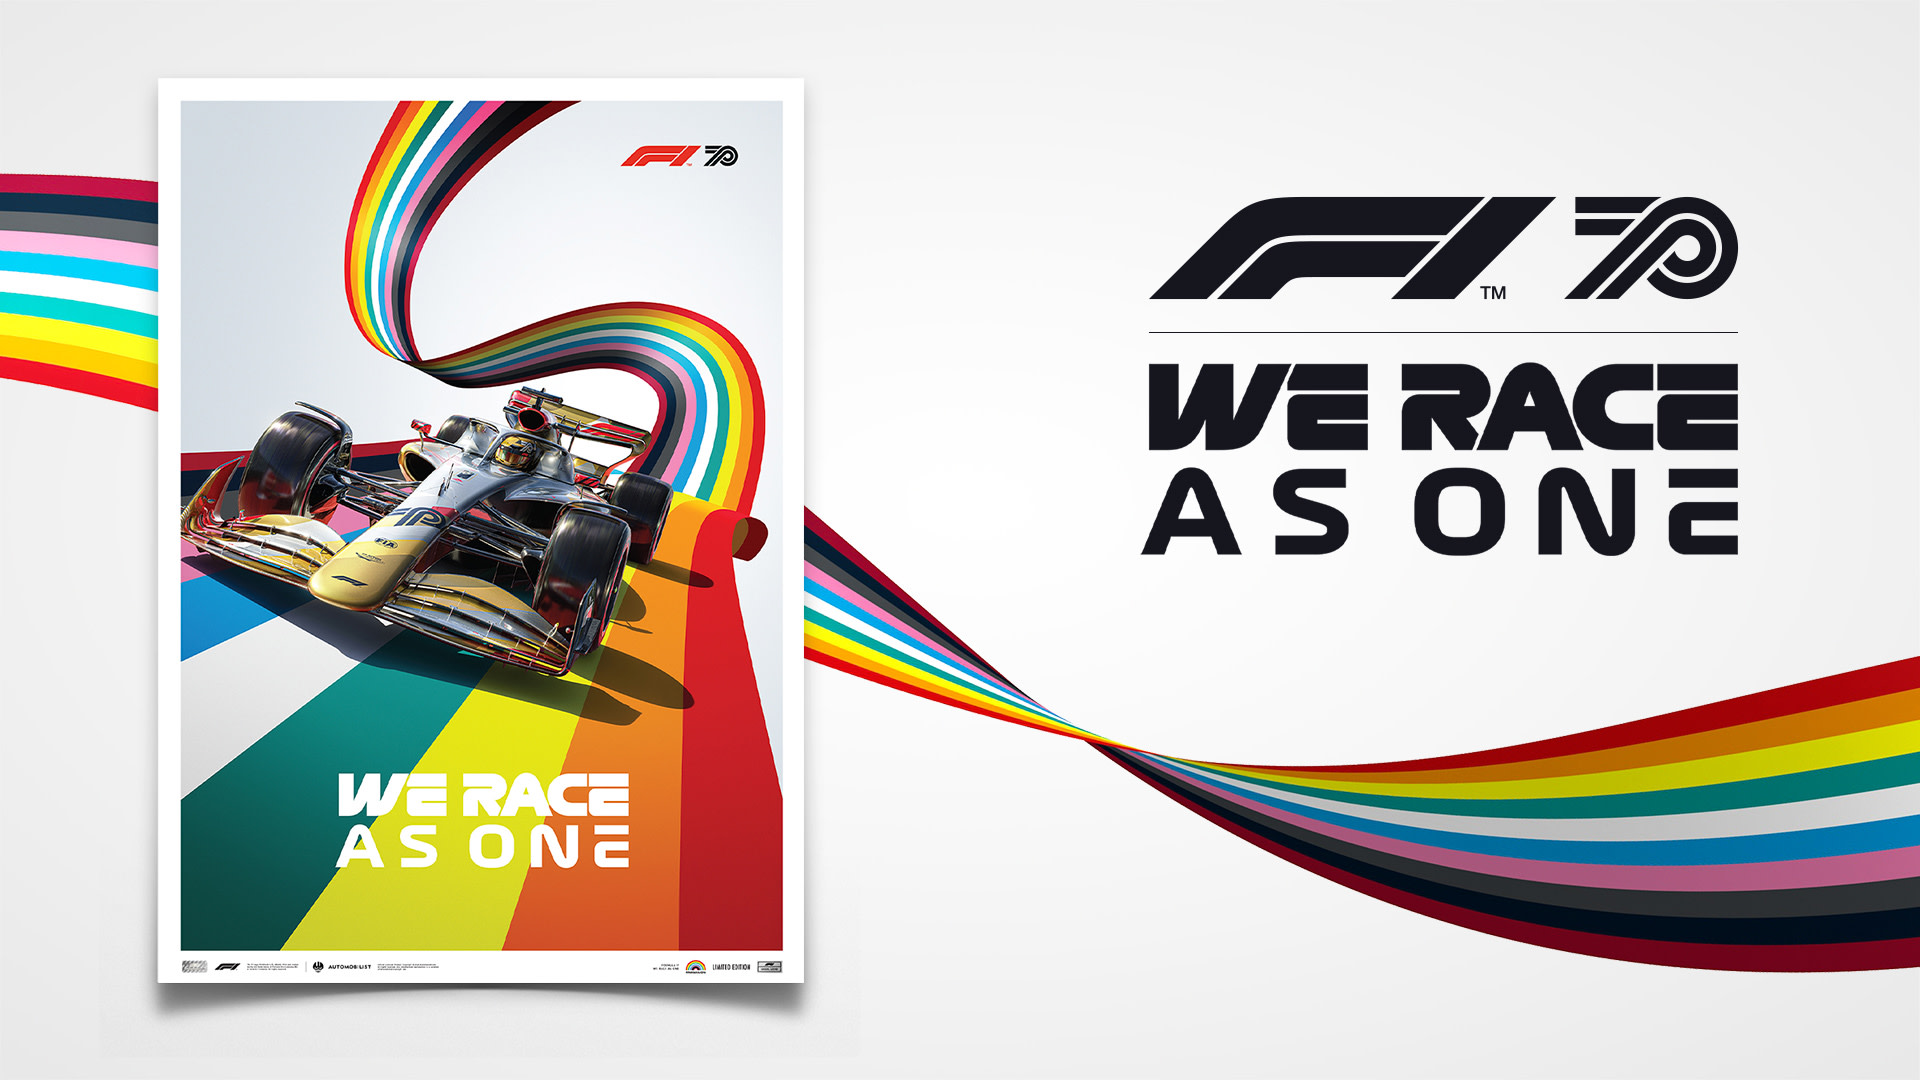 Get your hands on a brand new F1 #WeRaceAsOne poster